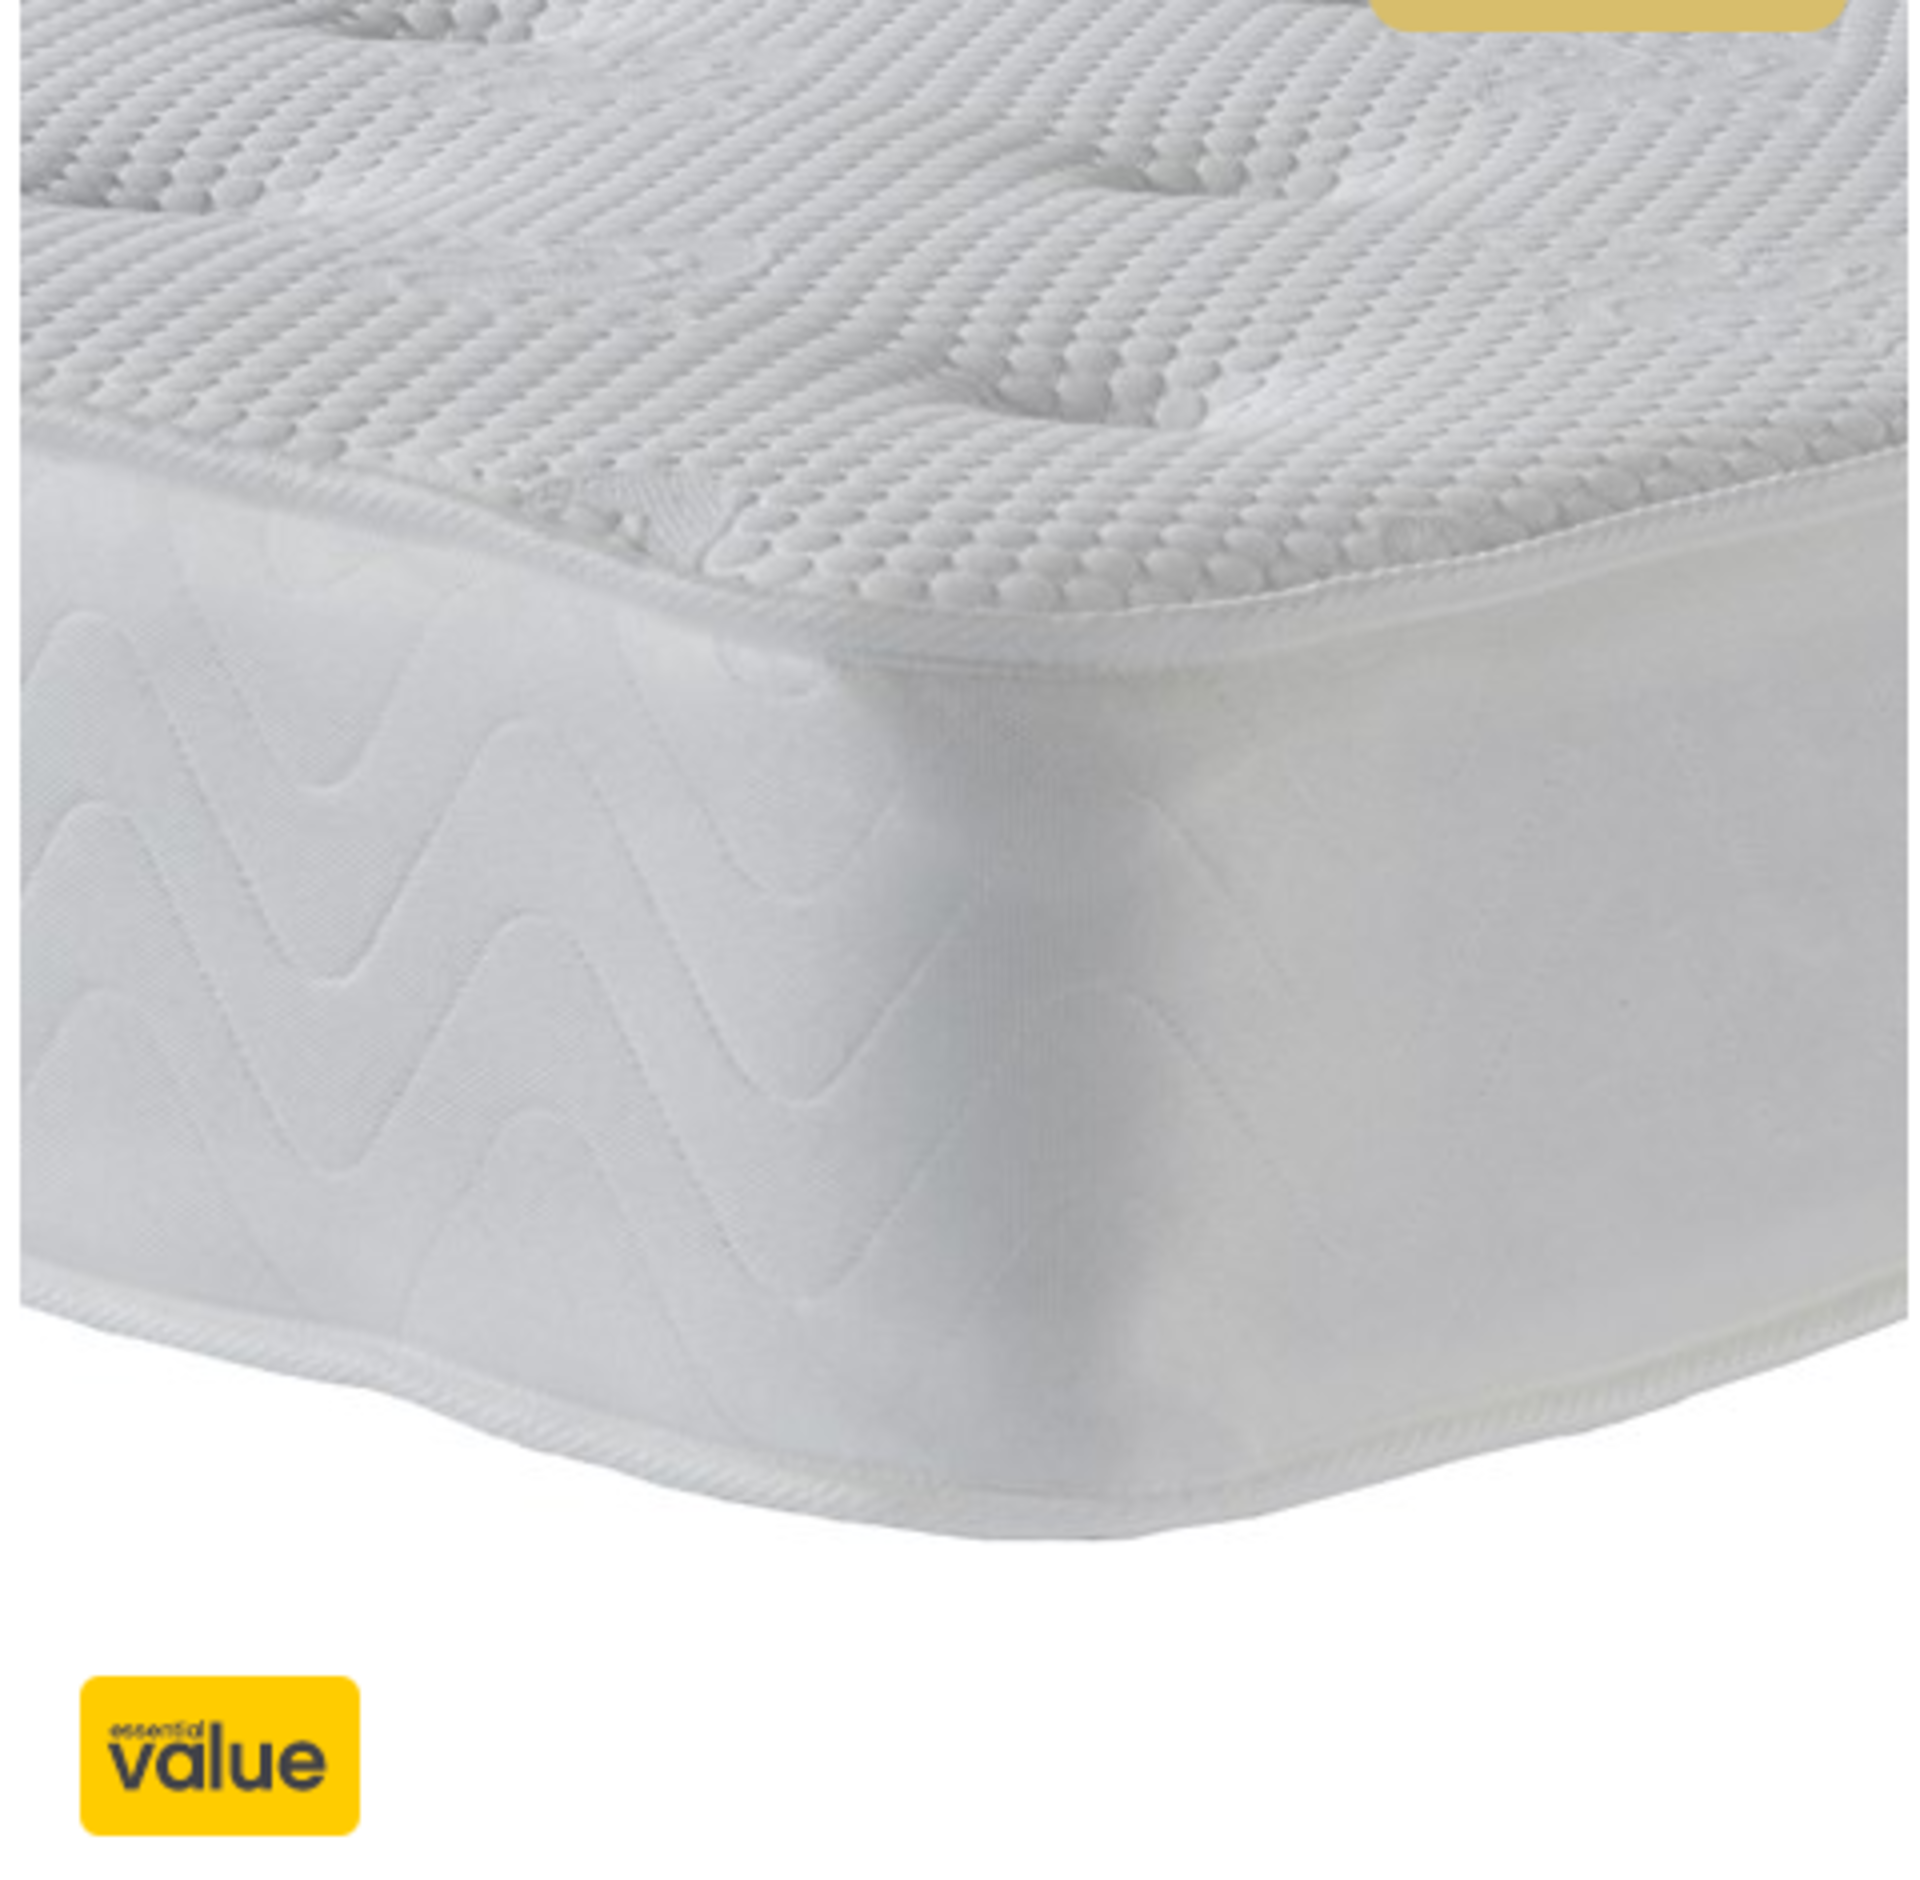 | 1X | SLEEPRIGHT GENOA BED MATTRESS 4FT6 DOUBLE | GOOD CONDITION & PACKAGED | RRP £349 |